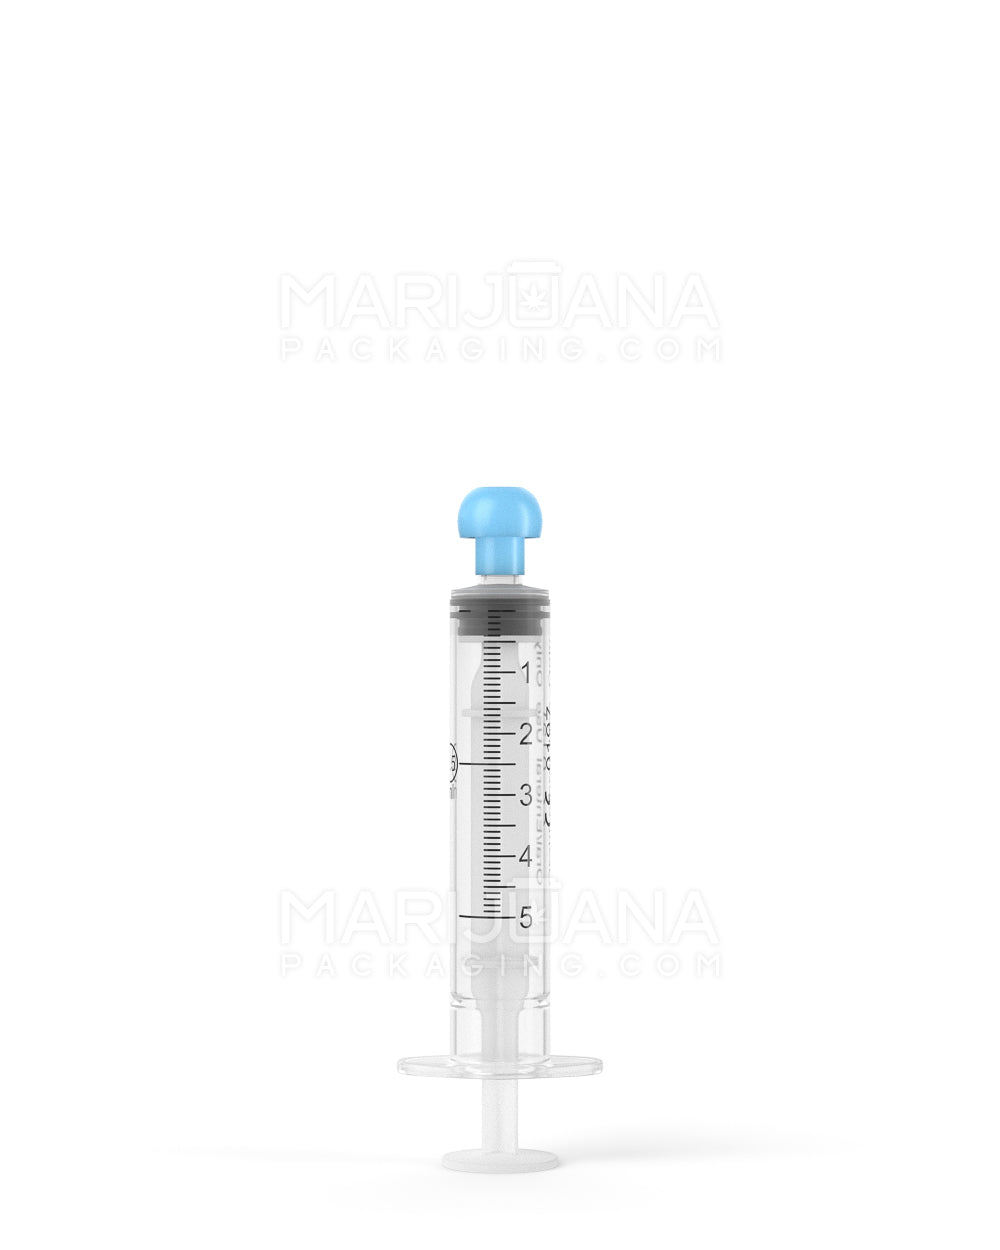 Plastic Oral Concentrate Syringes | 5mL - 1mL Increments - 100 Count - 8